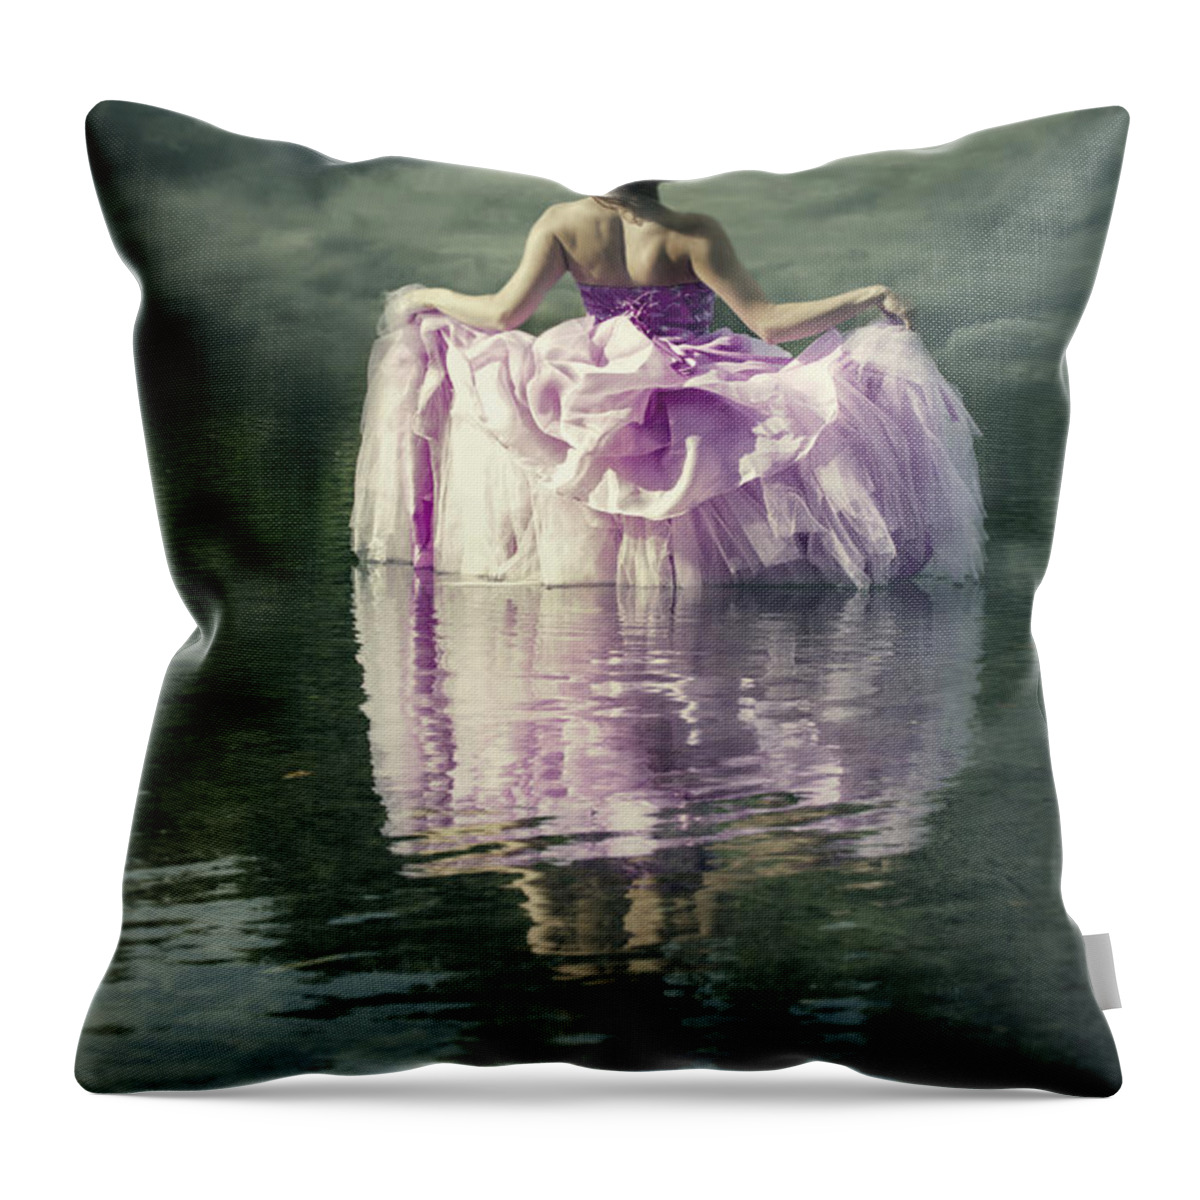 Female Throw Pillow featuring the photograph Lady In The Lake #1 by Joana Kruse